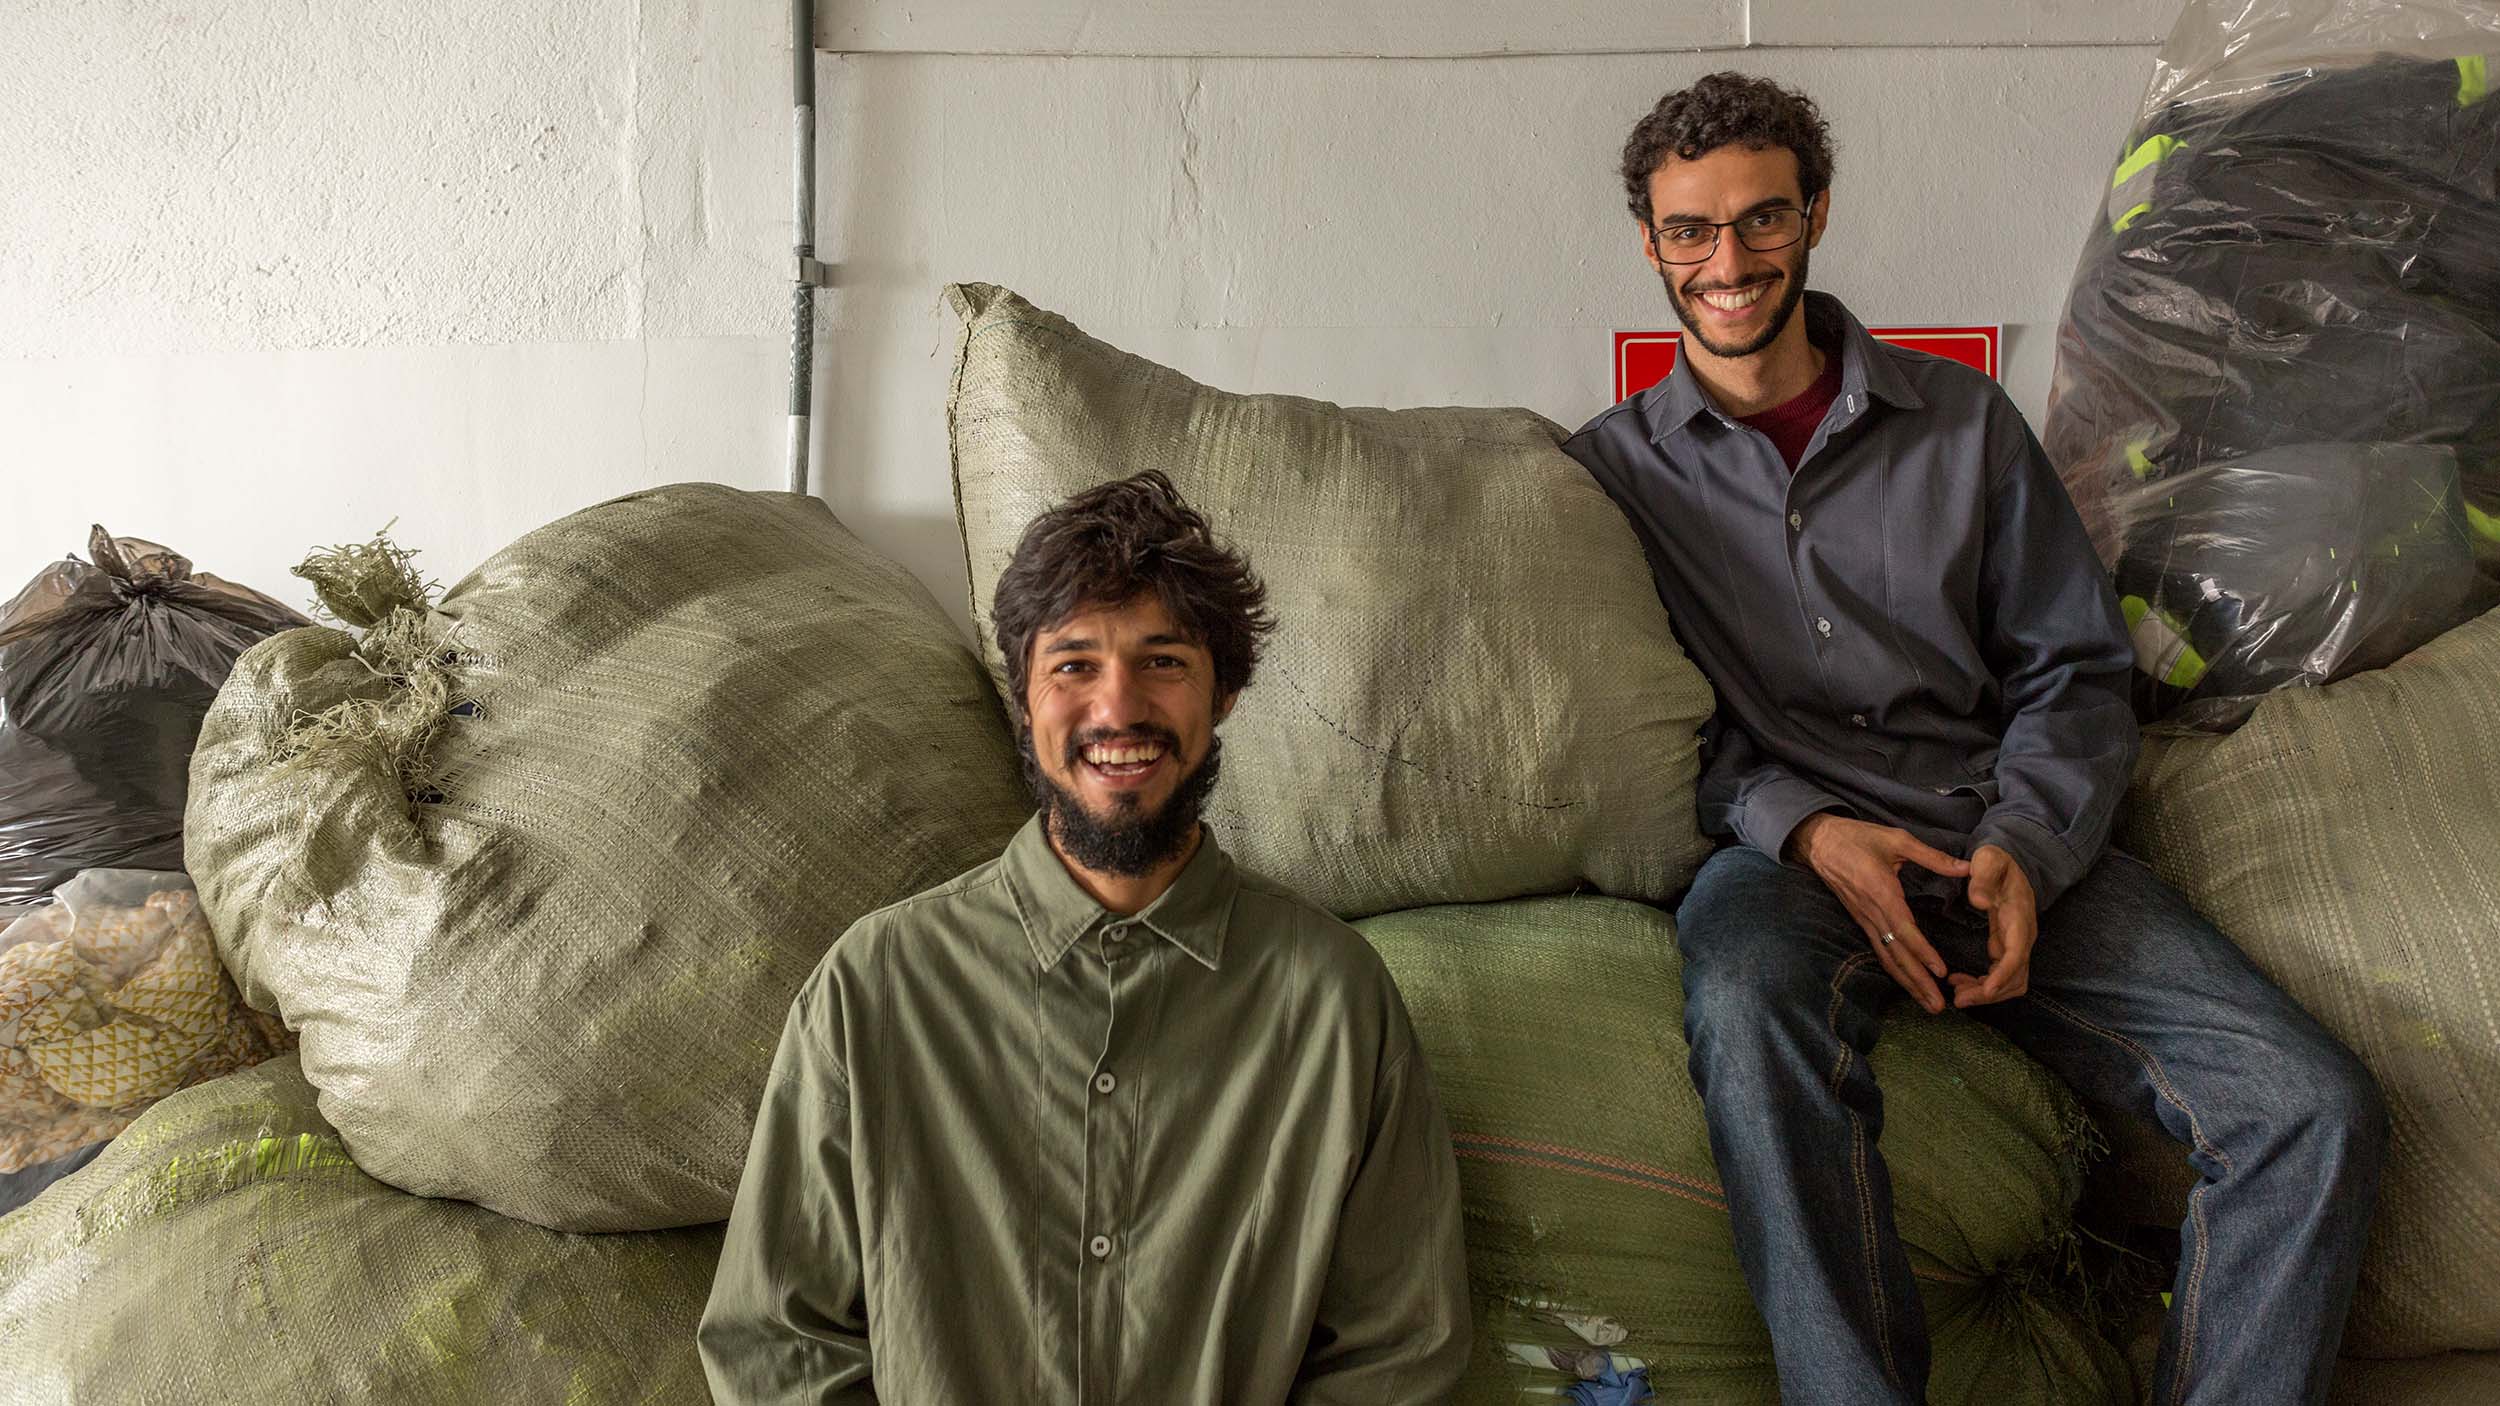 Retalhar Founders Lucas Corvacho (L) and Jonah Lessa (R) met while working in the impact reduction department at Lutha Uniformes, where they identified a market need for recycling used uniforms in Brazil.